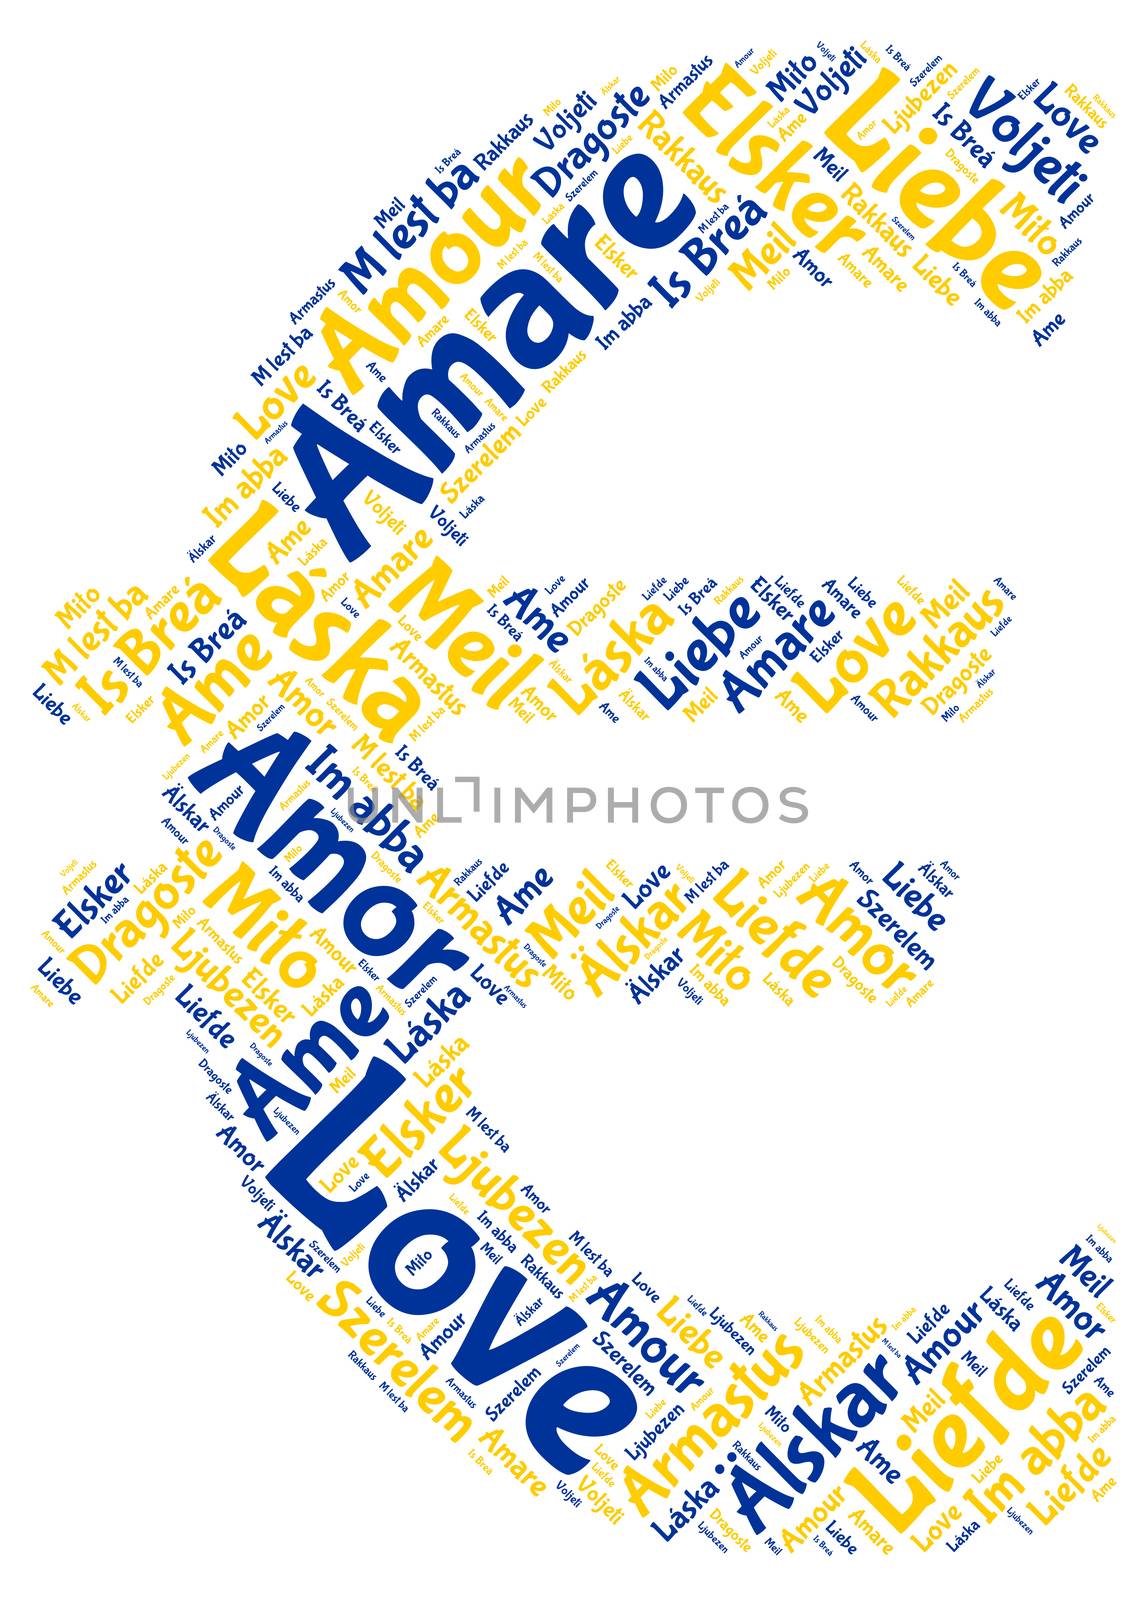 A word cloud with Love in all the European Union Languages